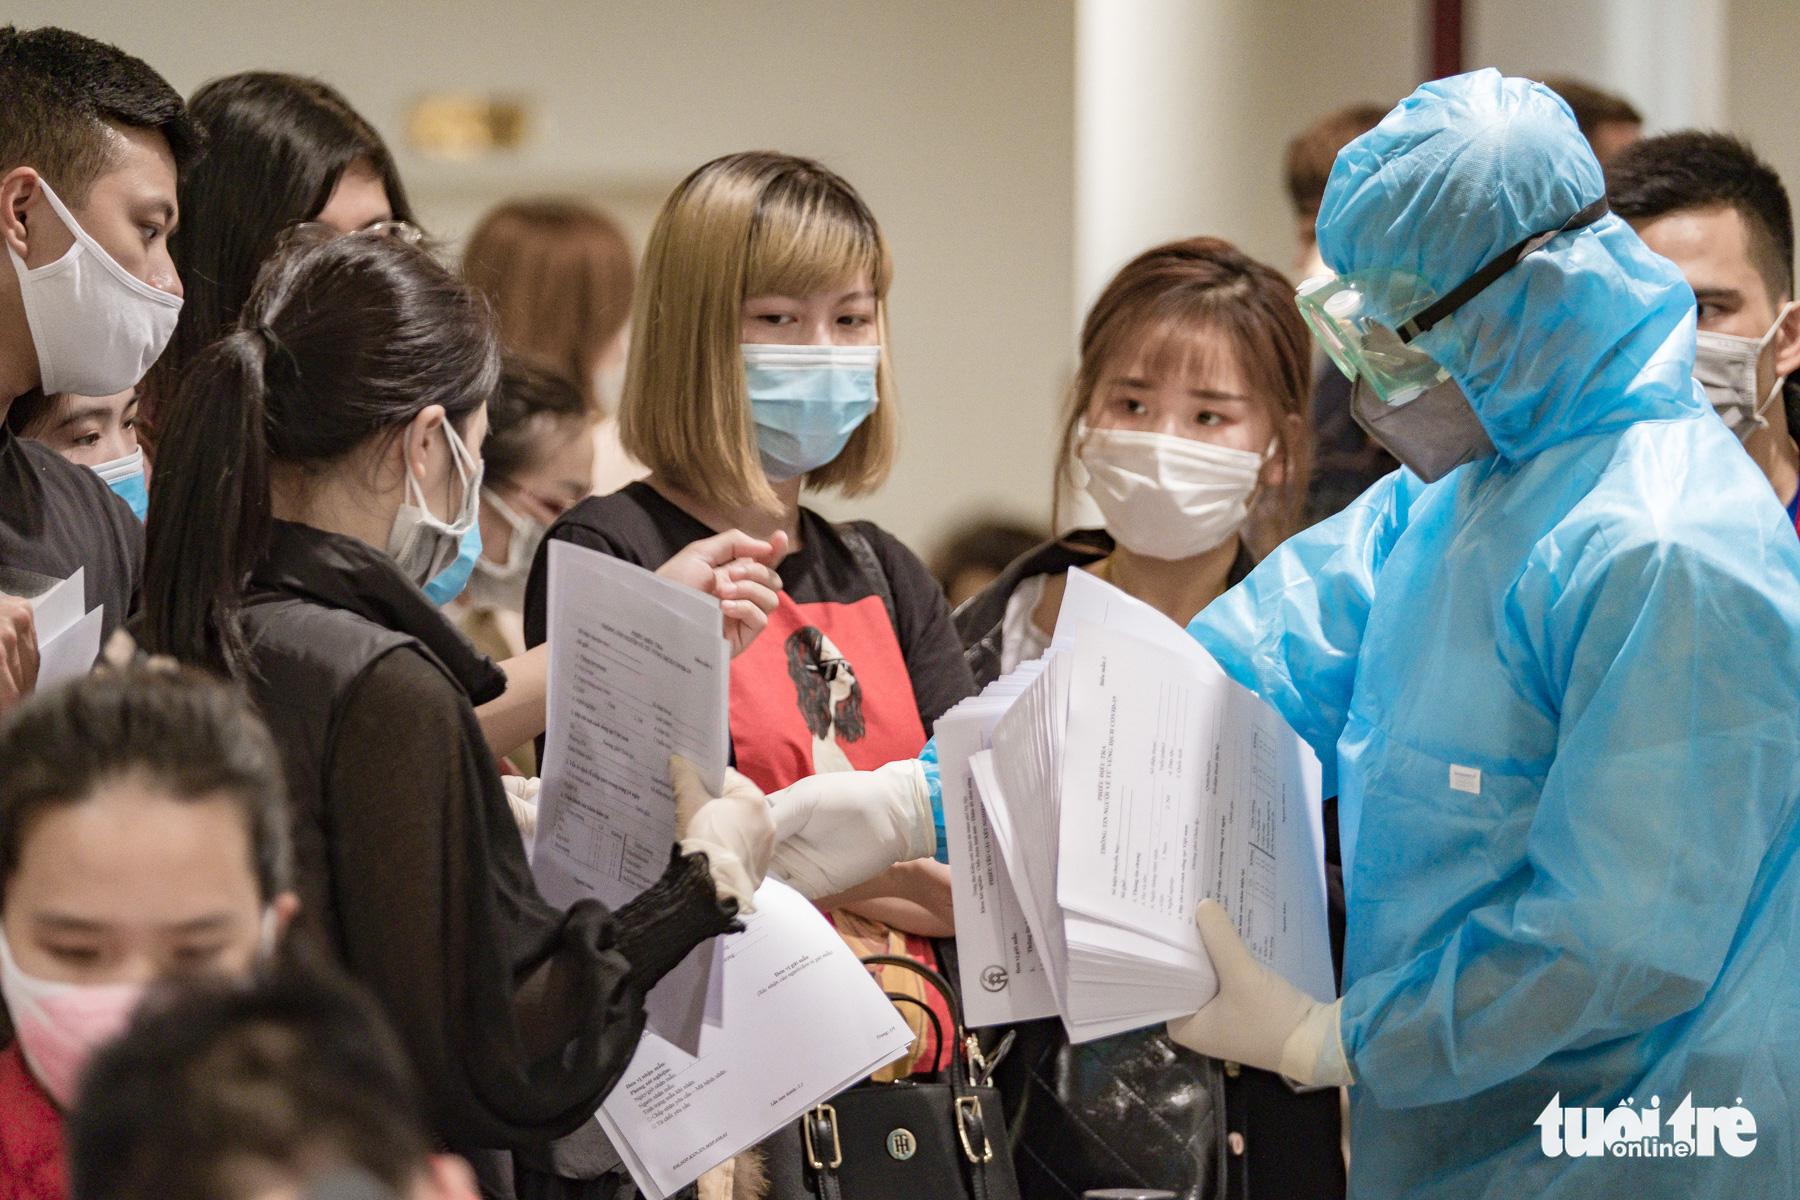 A health worker hands out health declaration forms to passengers arriving at Noi Bai International Airport in Hanoi, Vietnam, March 18, 2020. Photo: Nam Tran / Tuoi Tre